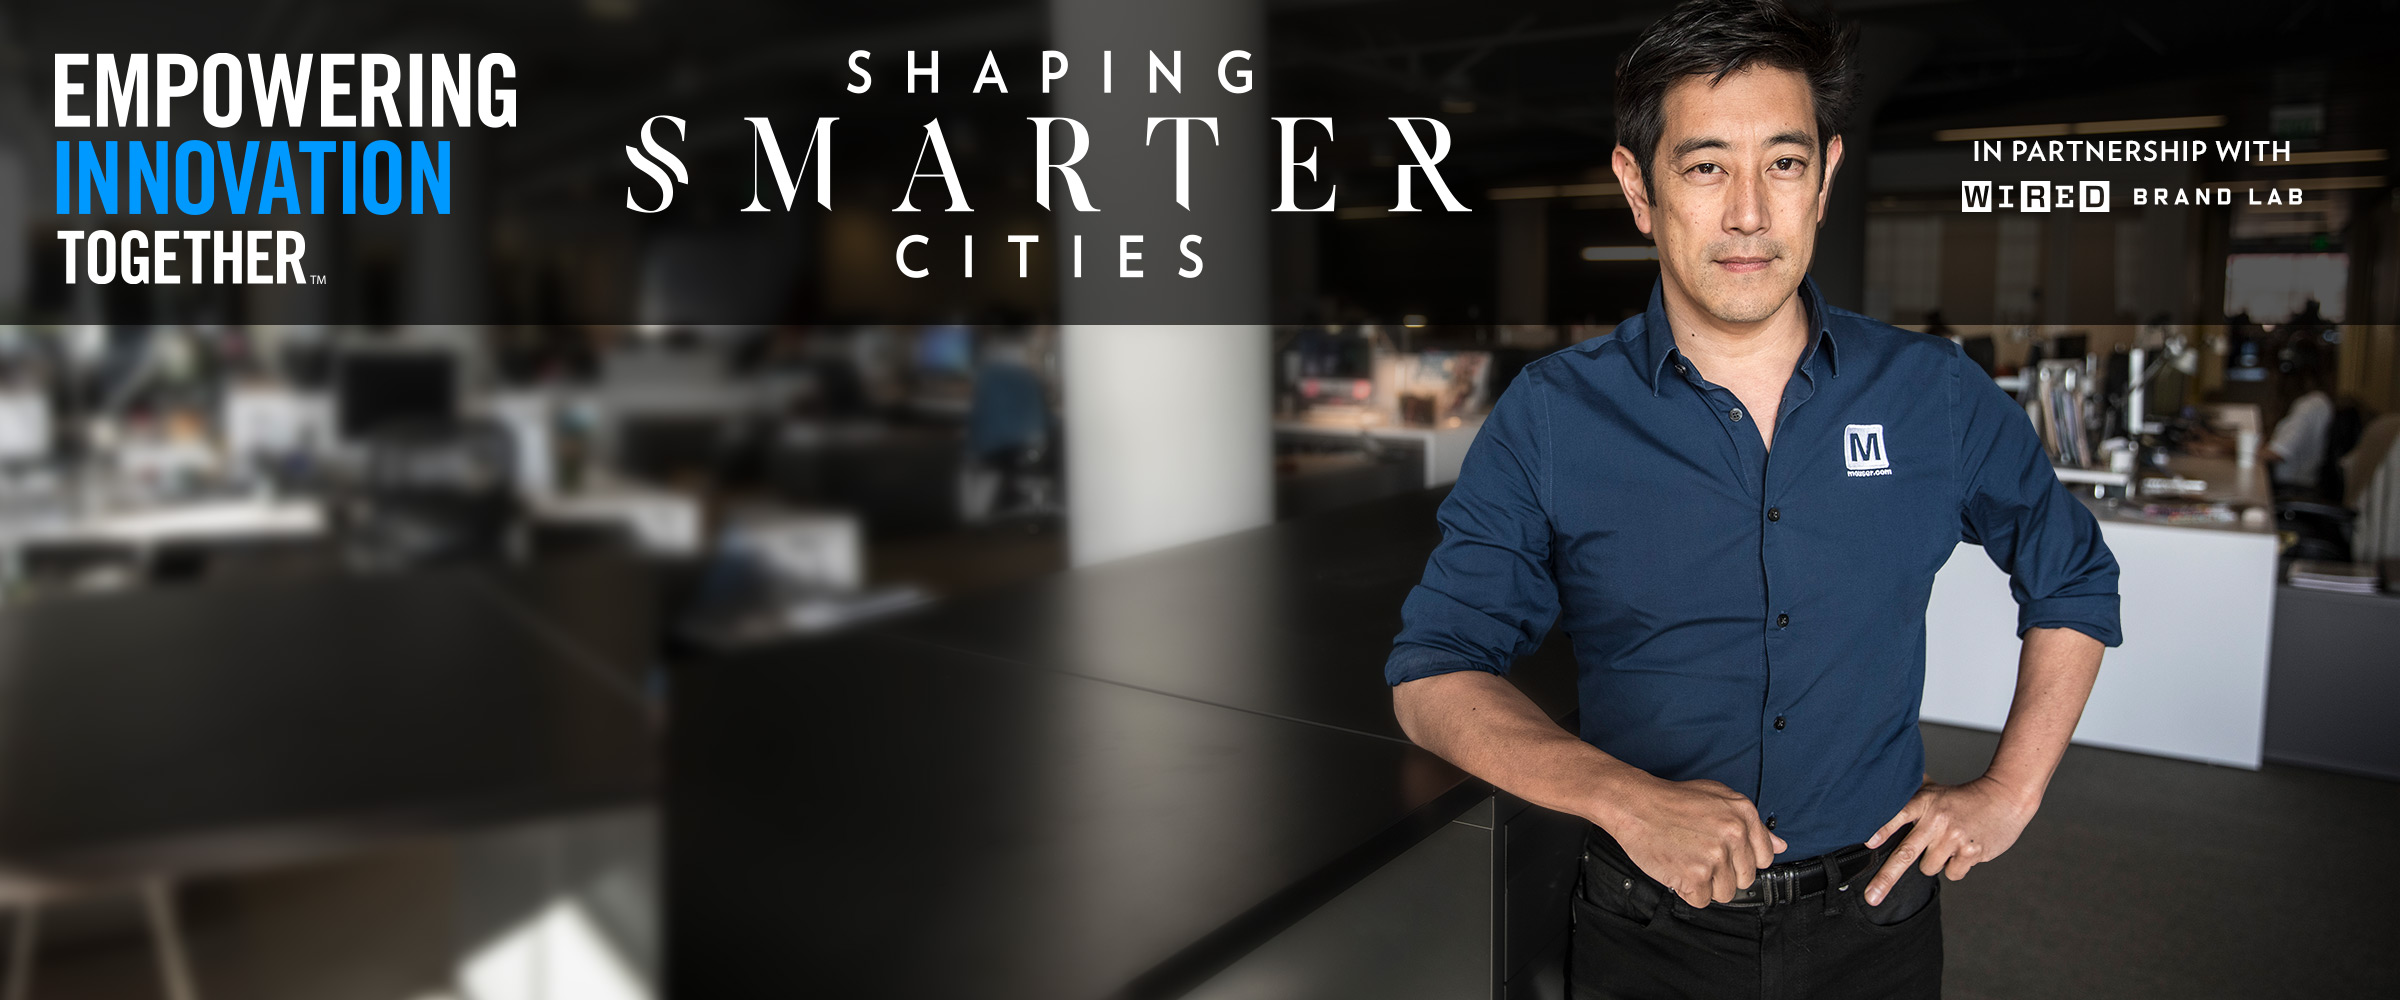 Mouser Electronics and Grant Imahara Present Final Video of Shaping Smarter Cities Series